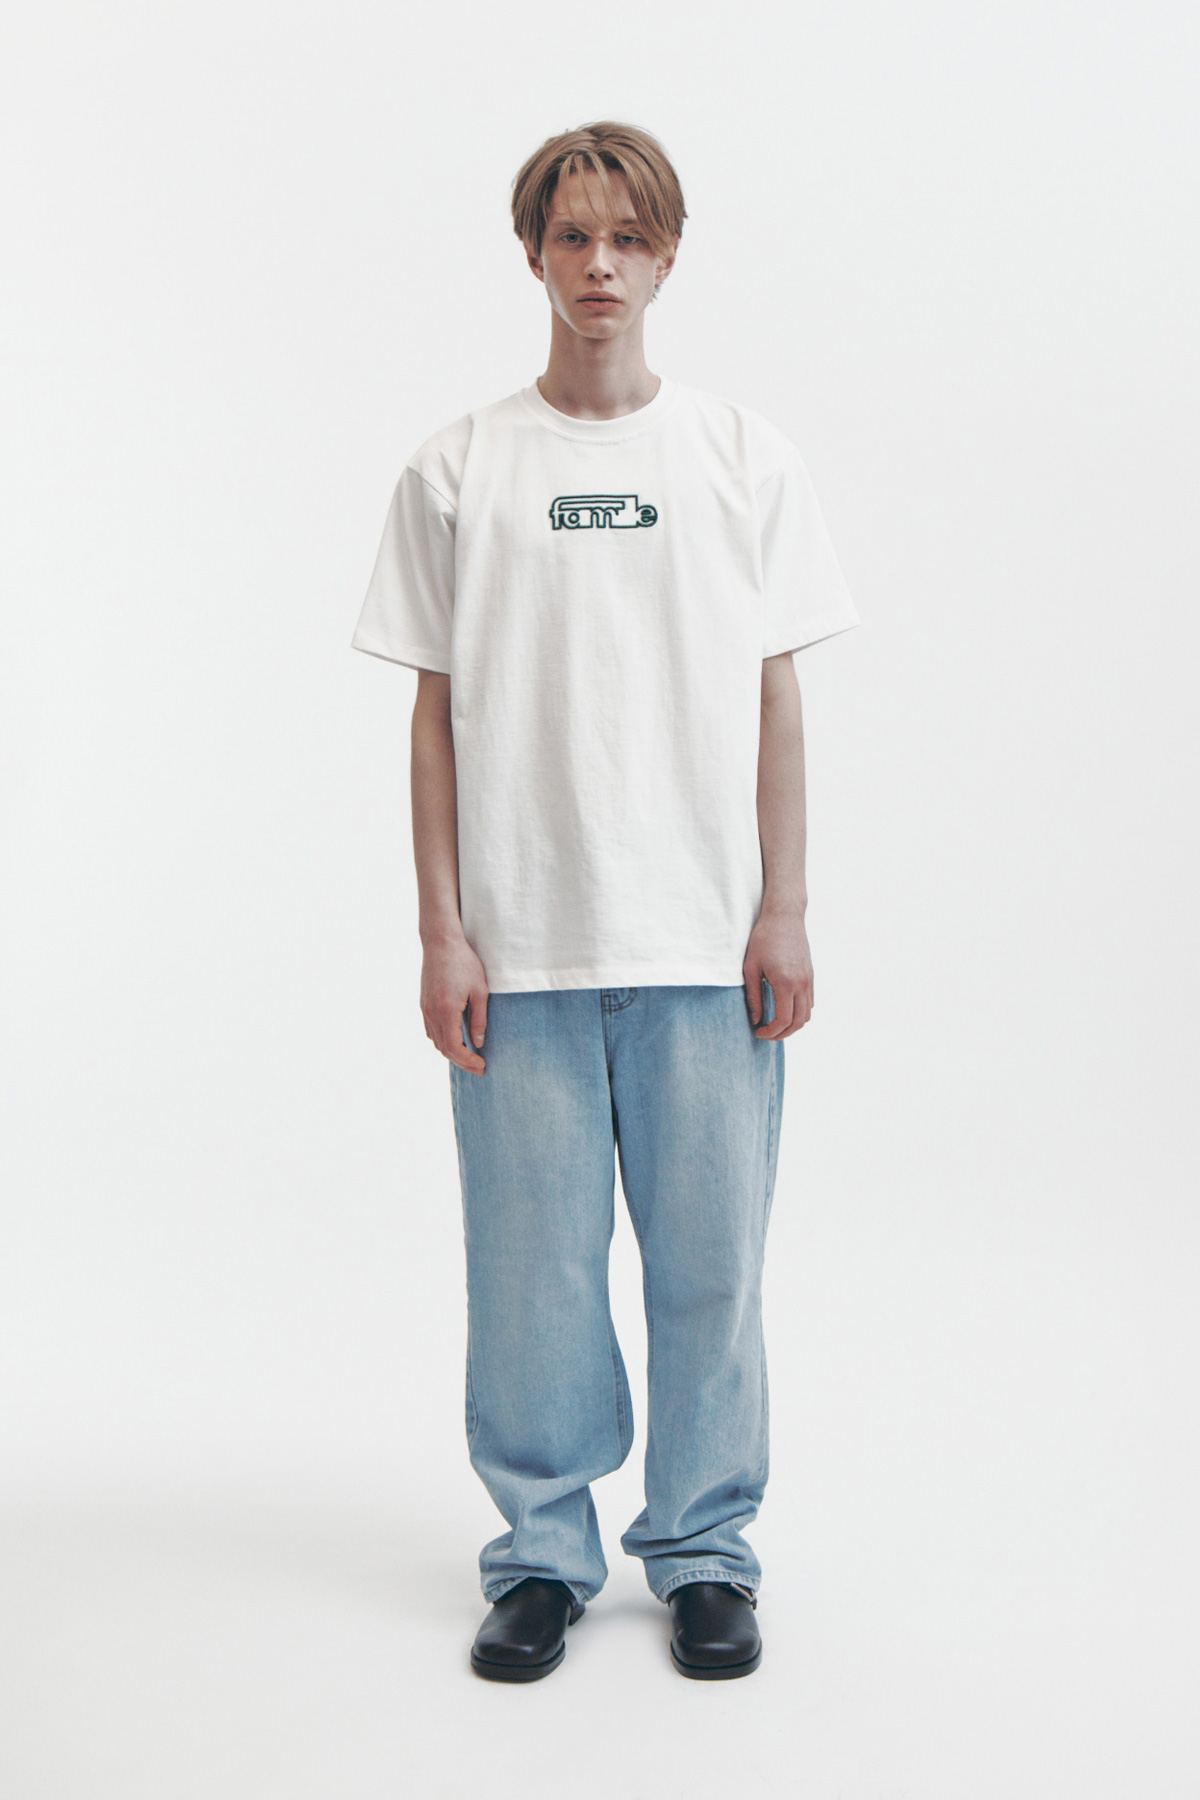 LINKED EMBROIDERY LOGO T-SHIRT(WHITE)